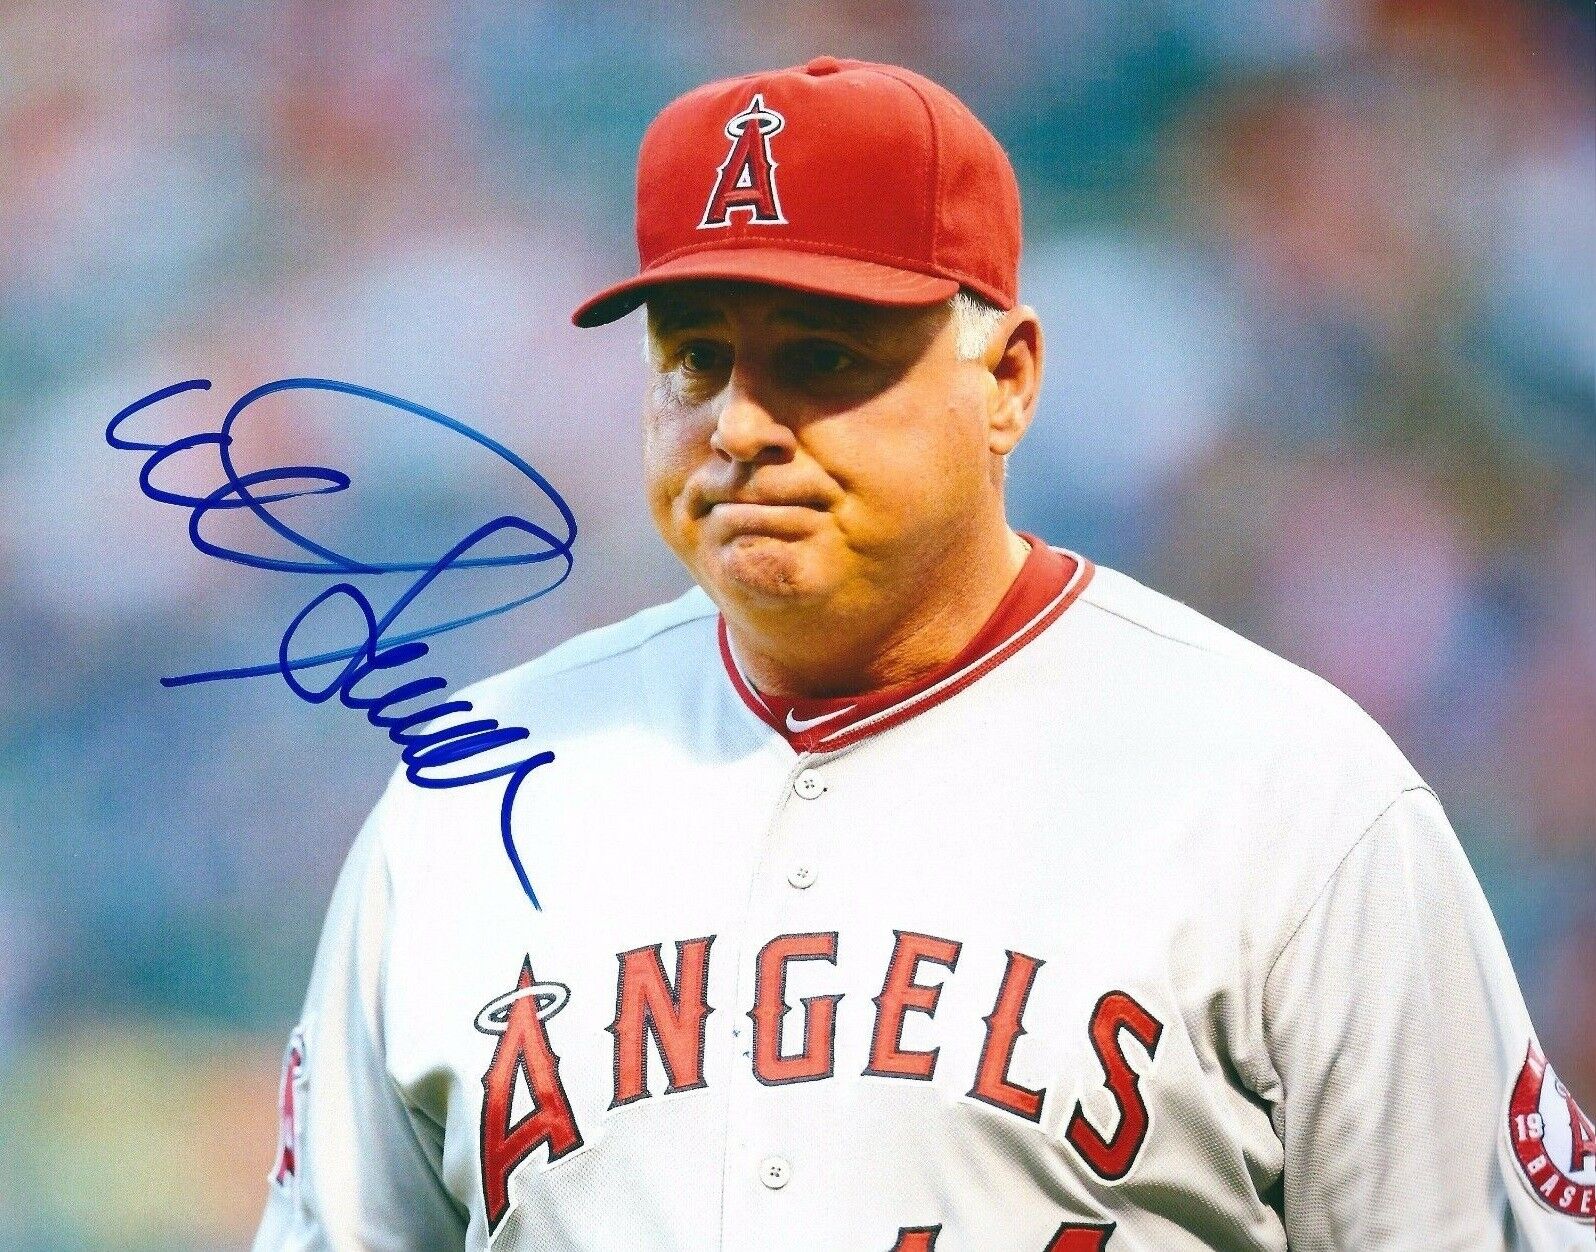 Mike Scioscia Autographed Signed 8x10 Photo Poster painting ( Angels ) REPRINT